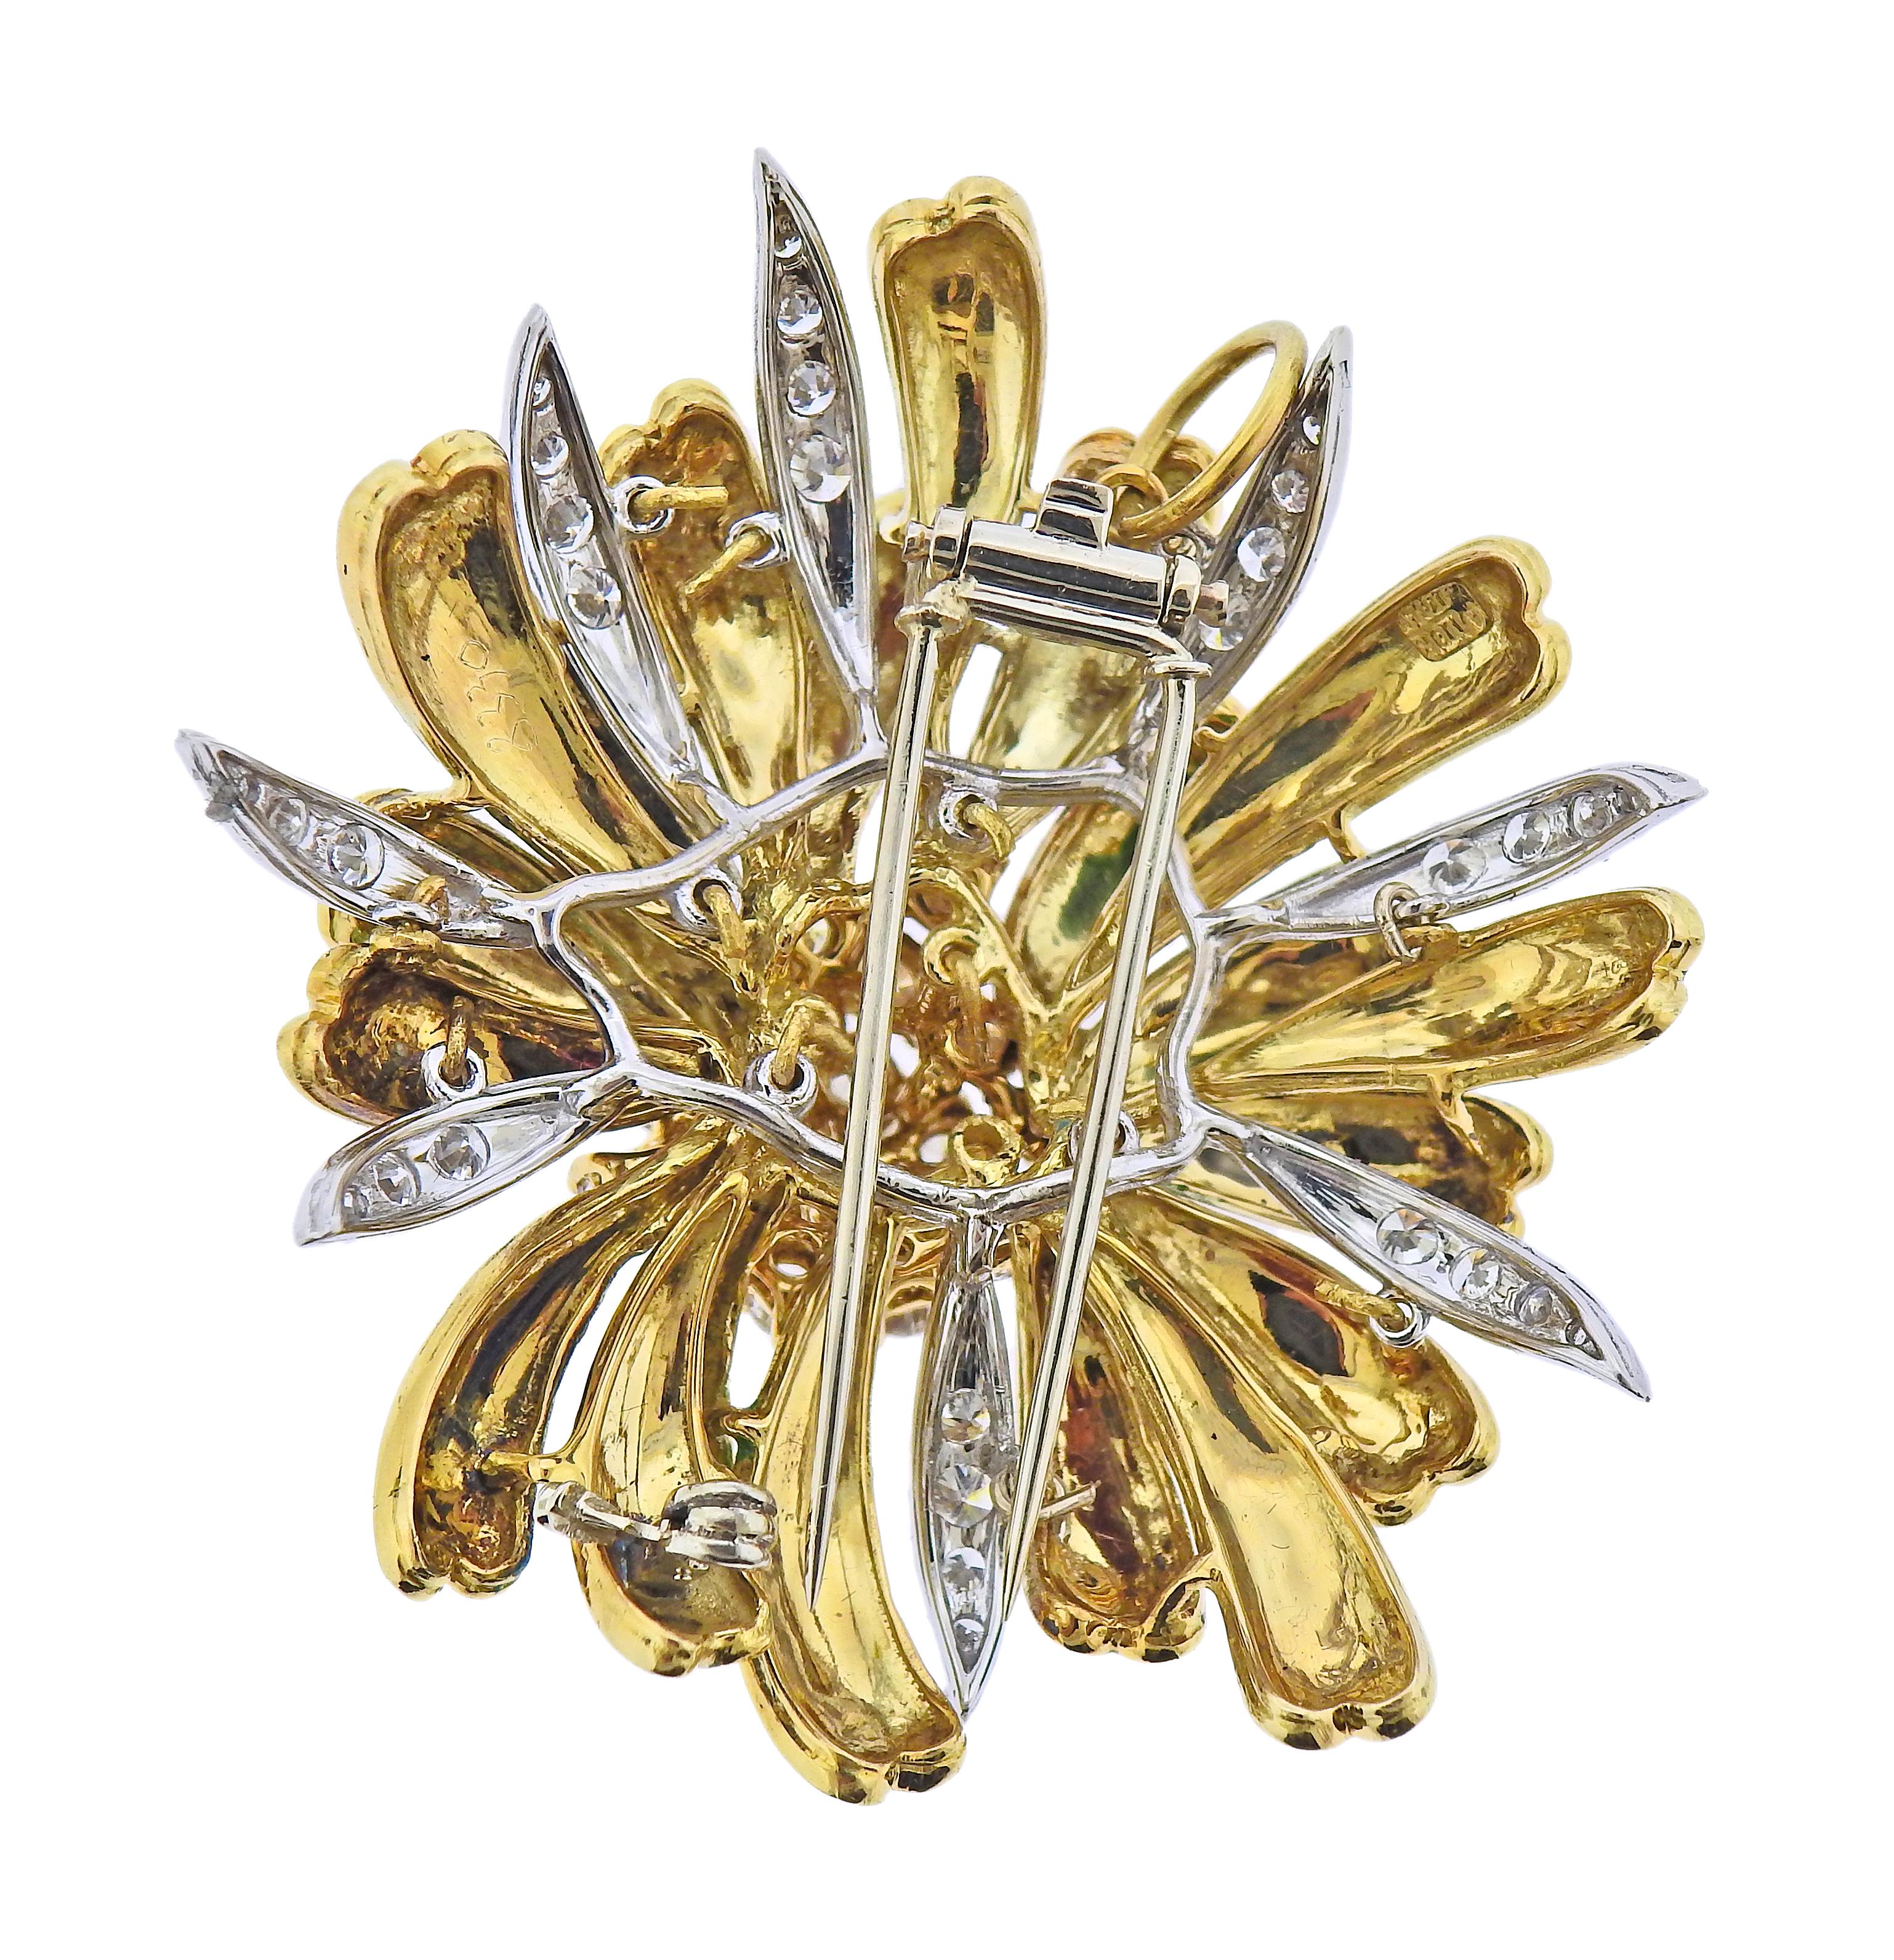 Large Italian-made 18k gold brooch with hidden bale. Adorned with multi color enamel (minor loss is present) and approx 2.40ctw in diamonds. Brooch is 46mm x 55mm. Marked: M 18k, Italy. Weight - 40.7 grams. 